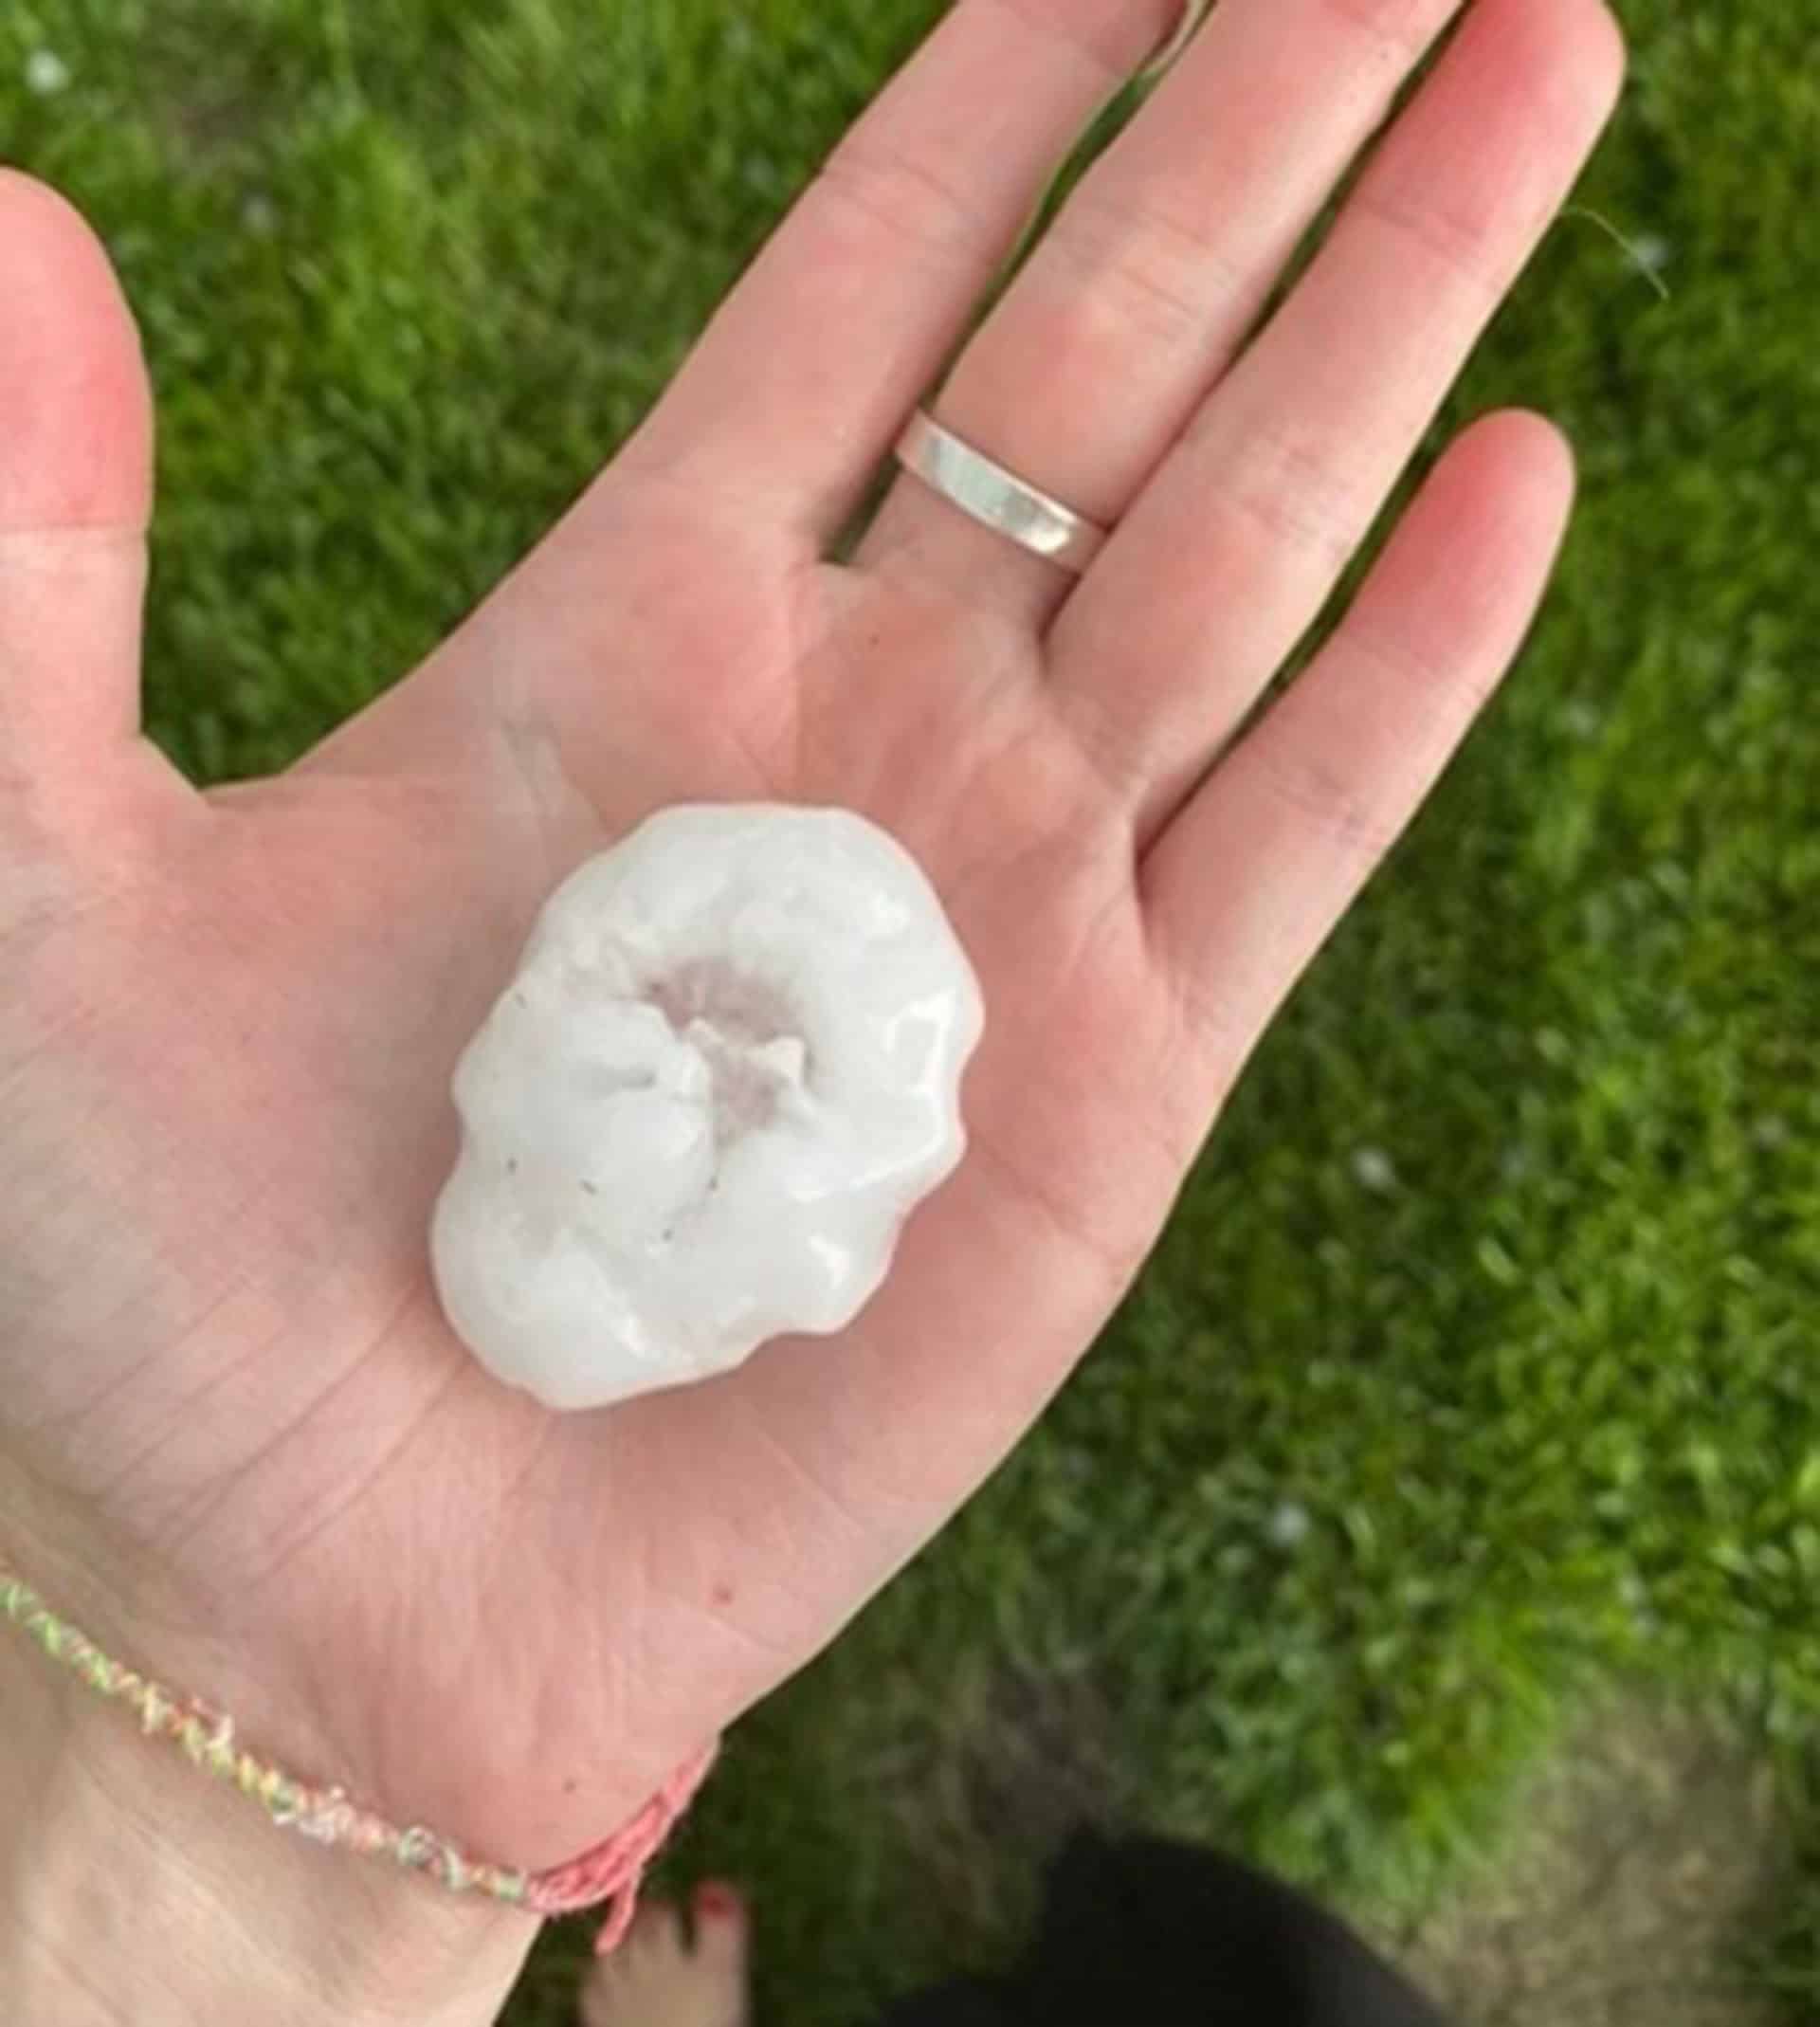 hail being held in someones hand